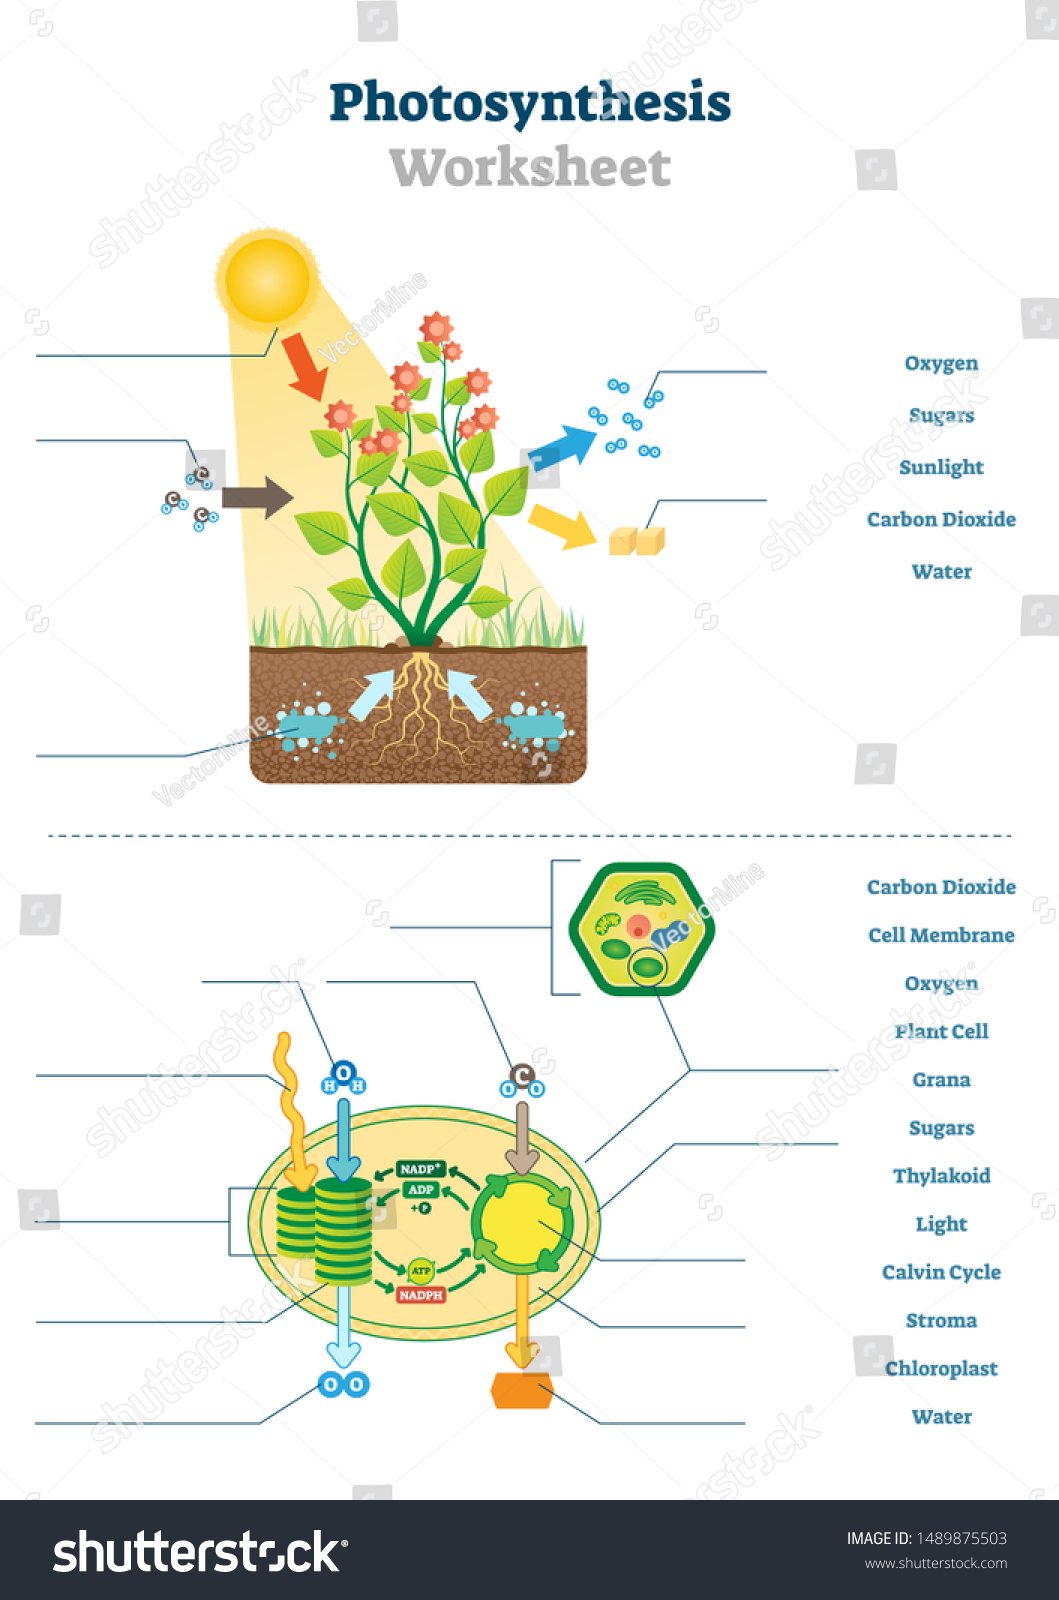 Photosynthesis Worksheet Vector Illustration Educational Blank Intended For Photosynthesis Worksheet High School